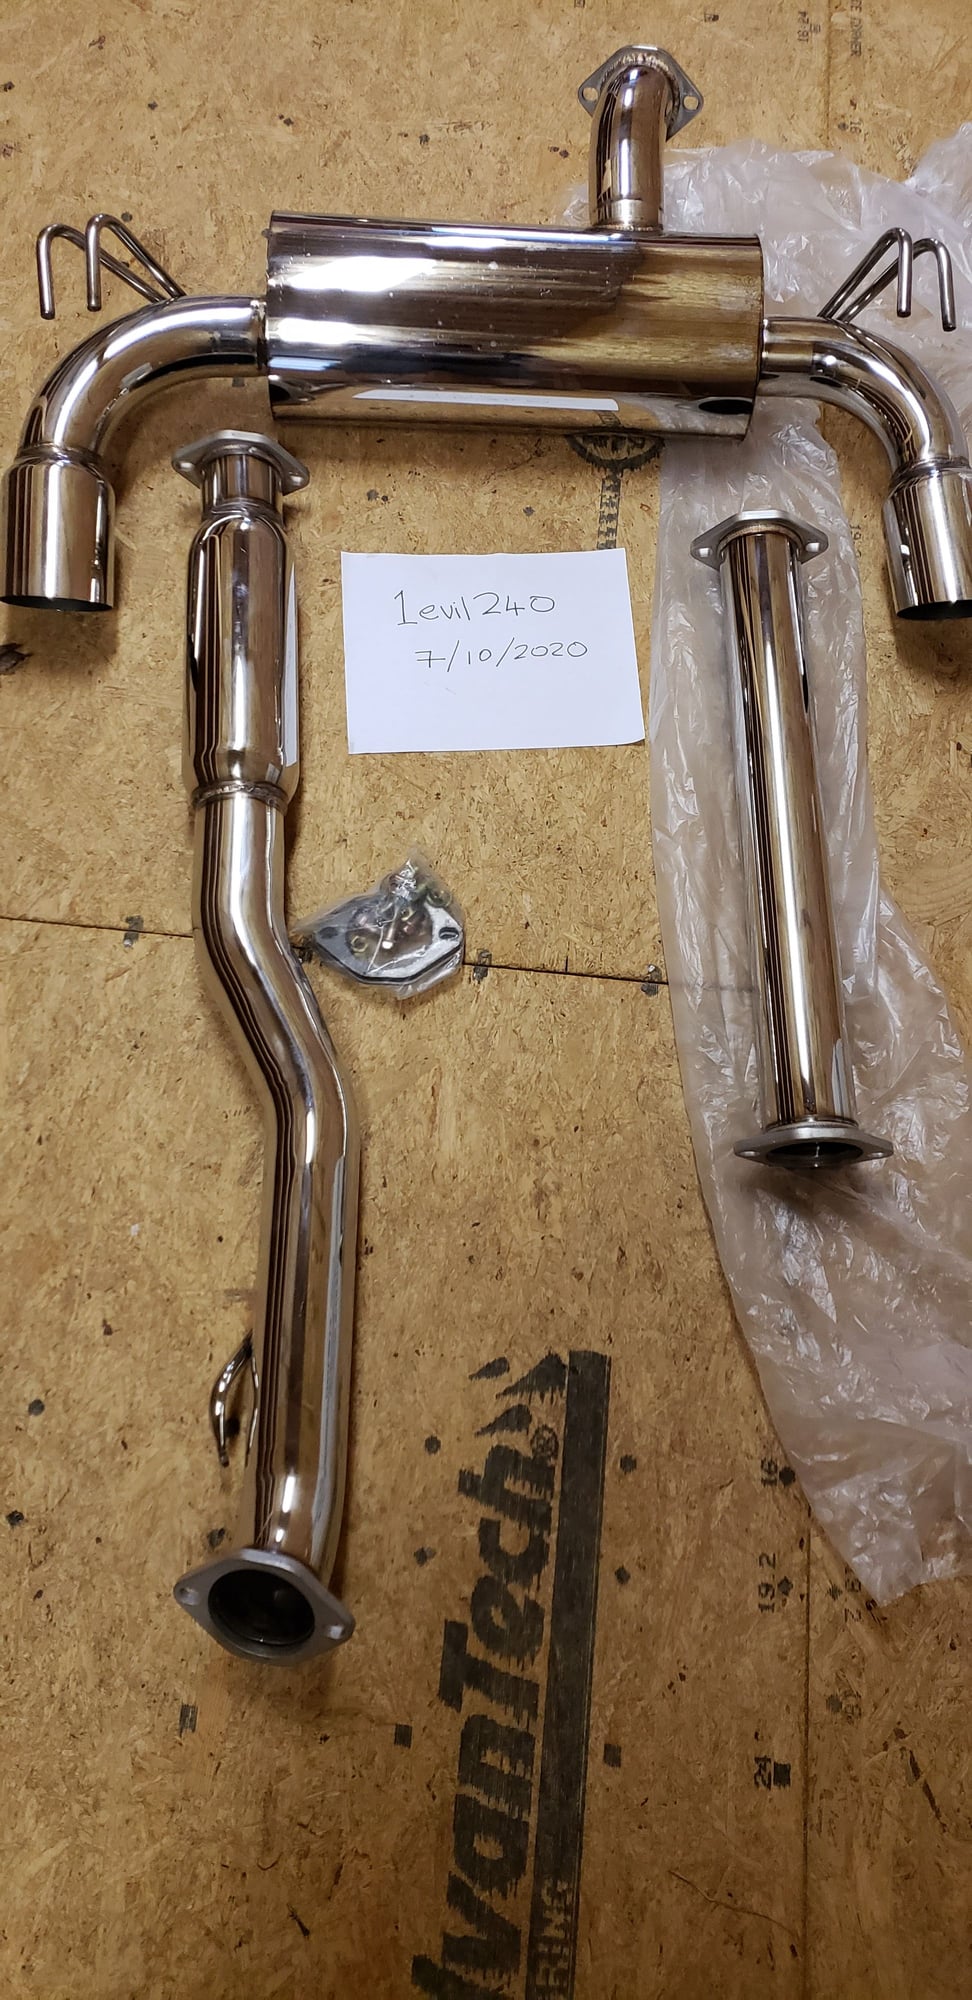 Engine - Exhaust - New Stainless Exhaust 3" with 4.5" outlet EVO X - New - Greenwod, DE 19950, United States